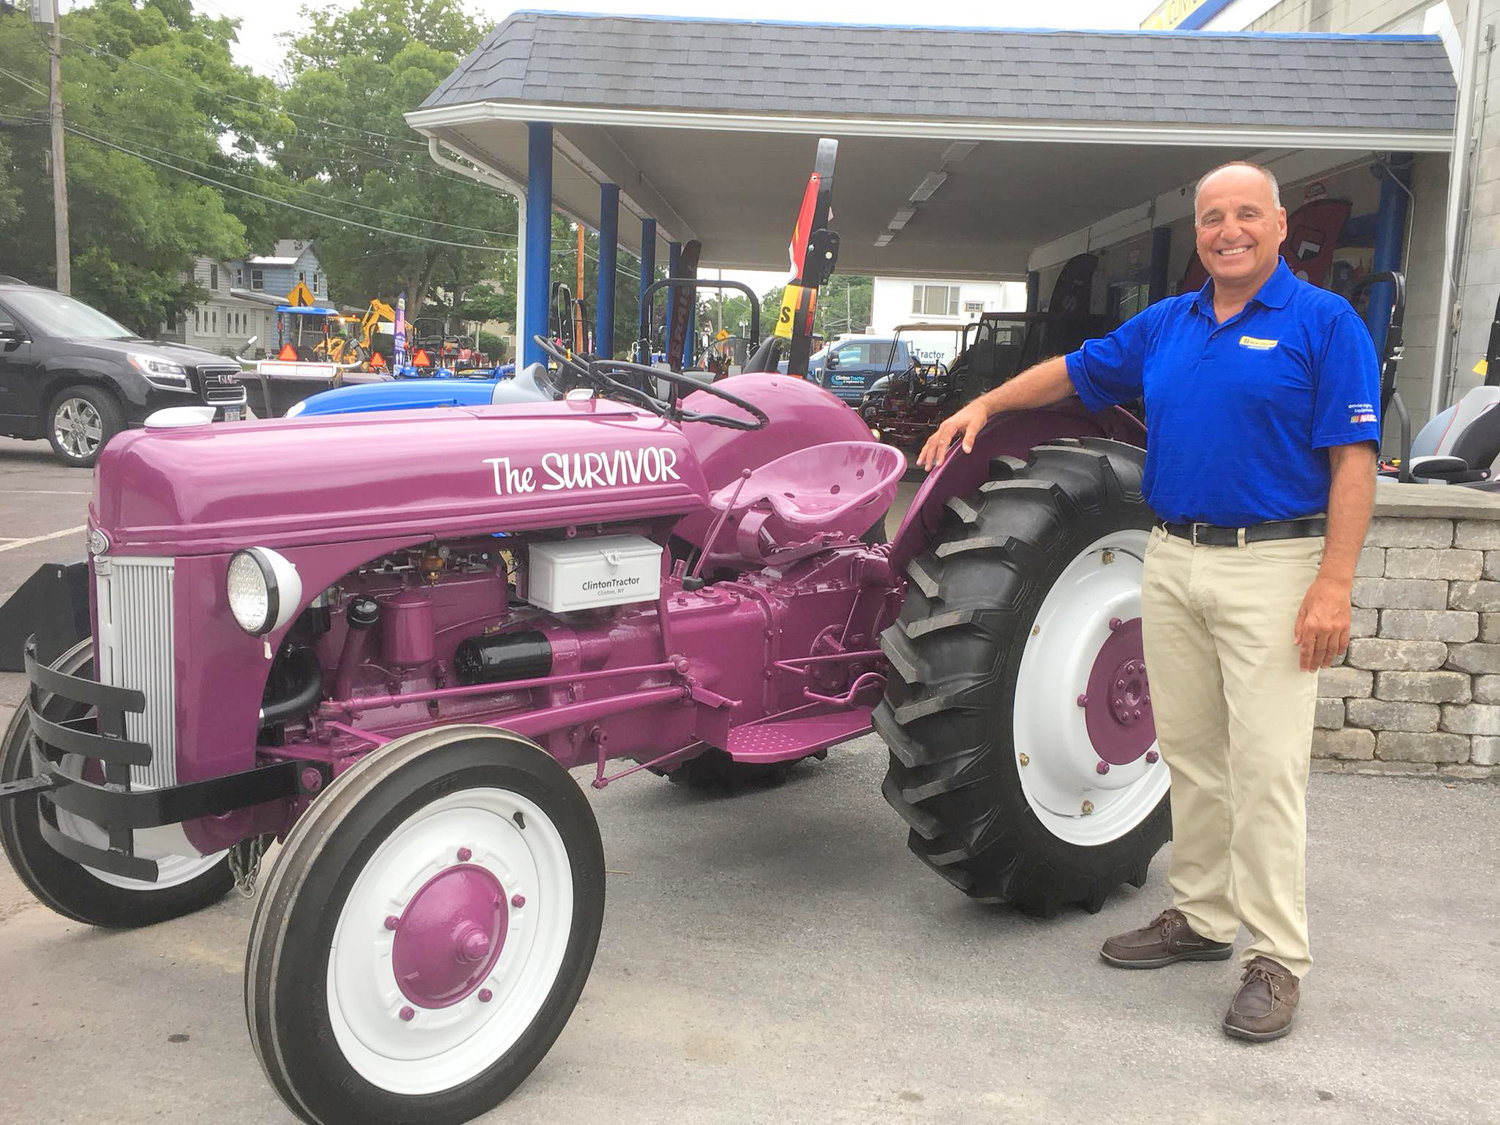 John Calidonna, co-owner of Clinton Tractor, pictured with the Survivor Tractor.